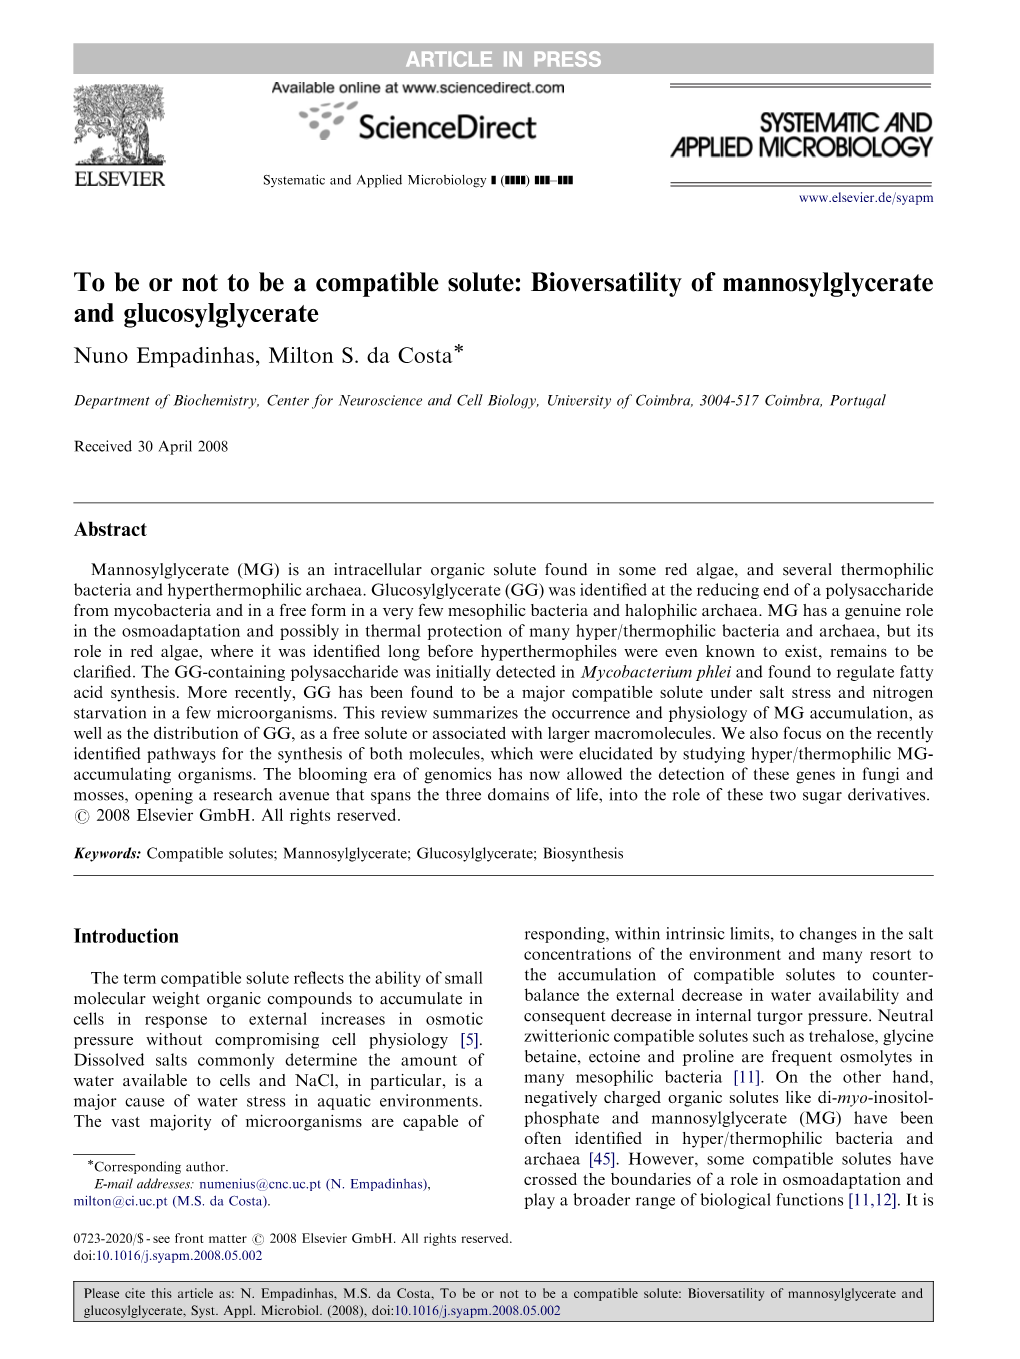 To Be Or Not to Be a Compatible Solute: Bioversatility of Mannosylglycerate and Glucosylglycerate Nuno Empadinhas, Milton S